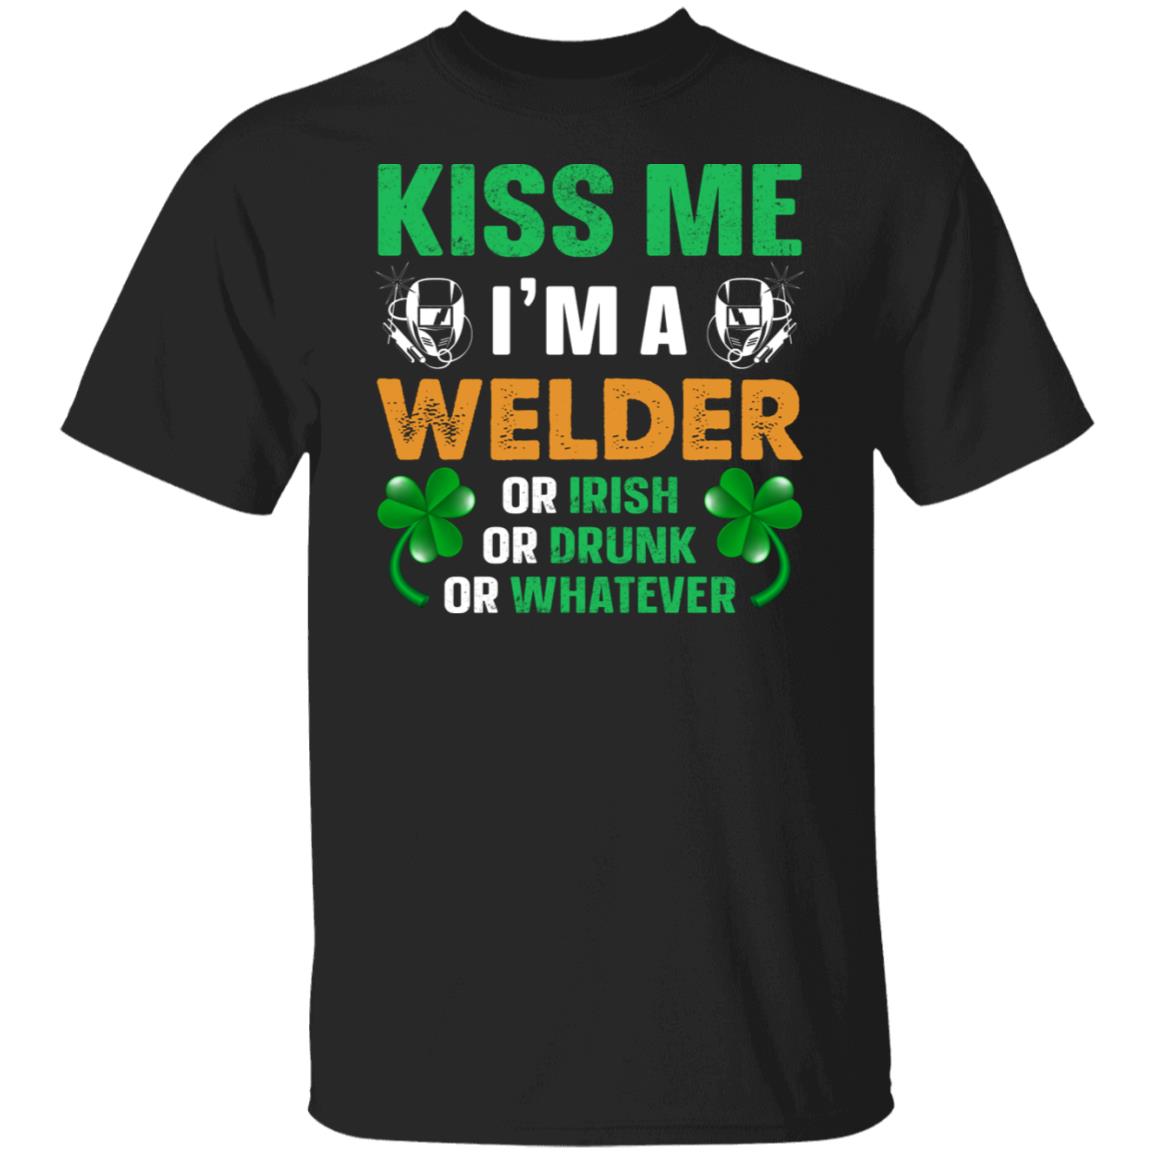 Kiss Me I'm a Welder or Irish or Drunk or Whatever Funny Shirt